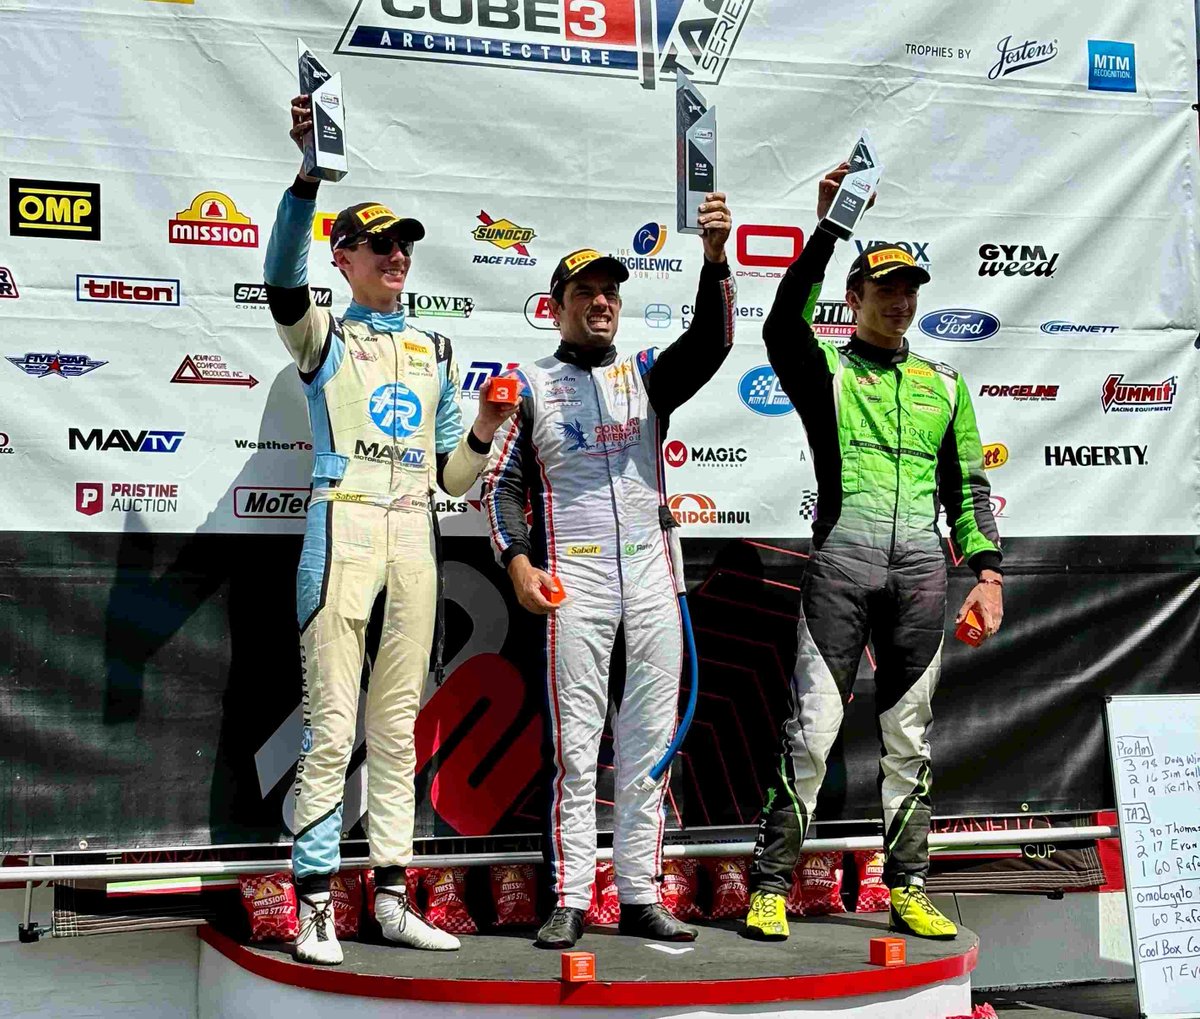 TEAM NEWS: Runner-Up Finish for @TeamSLRinsider Newcomer at @LimeRockPark 18-Year-Old New Englander Evan Slater Starts Second, Fends Off All Challengers; Strong Start by Barry Boes Ruined by Midrace Contact, Soldiers Home 16th Read here: gotransam.com/news/Runner-Up…